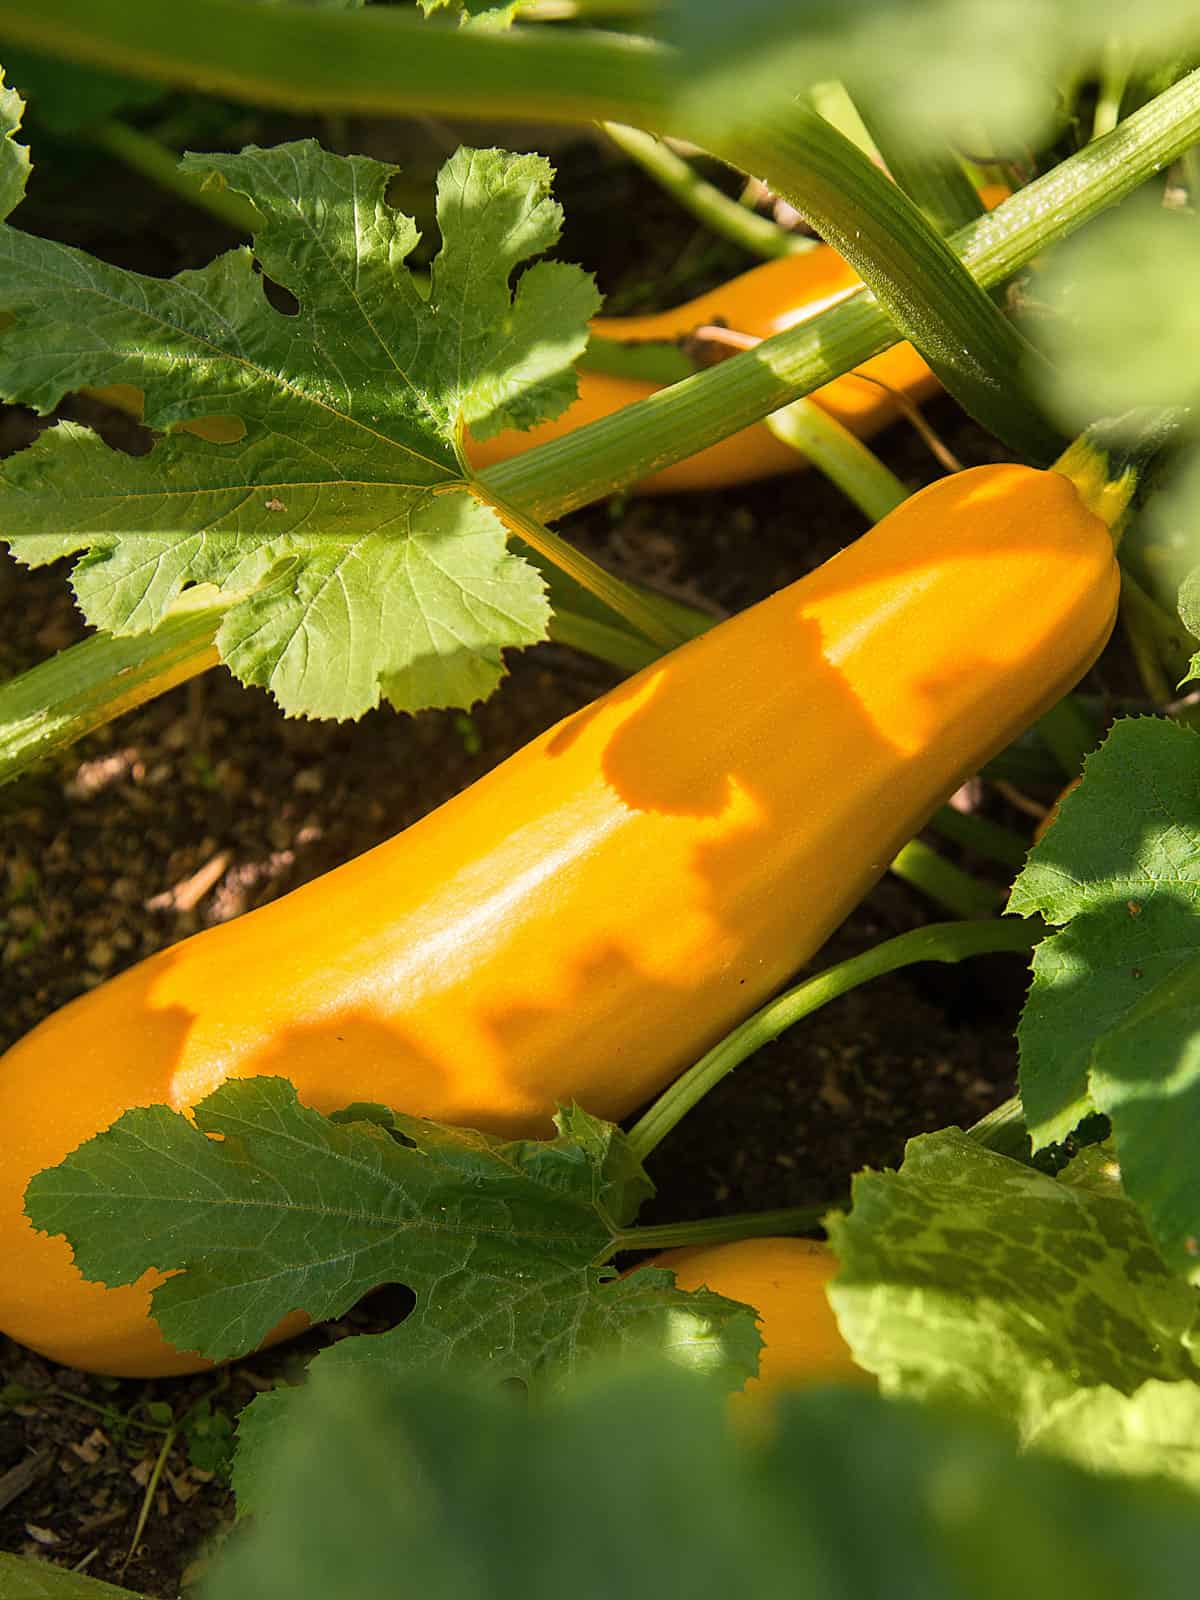 A squash growing in the garden